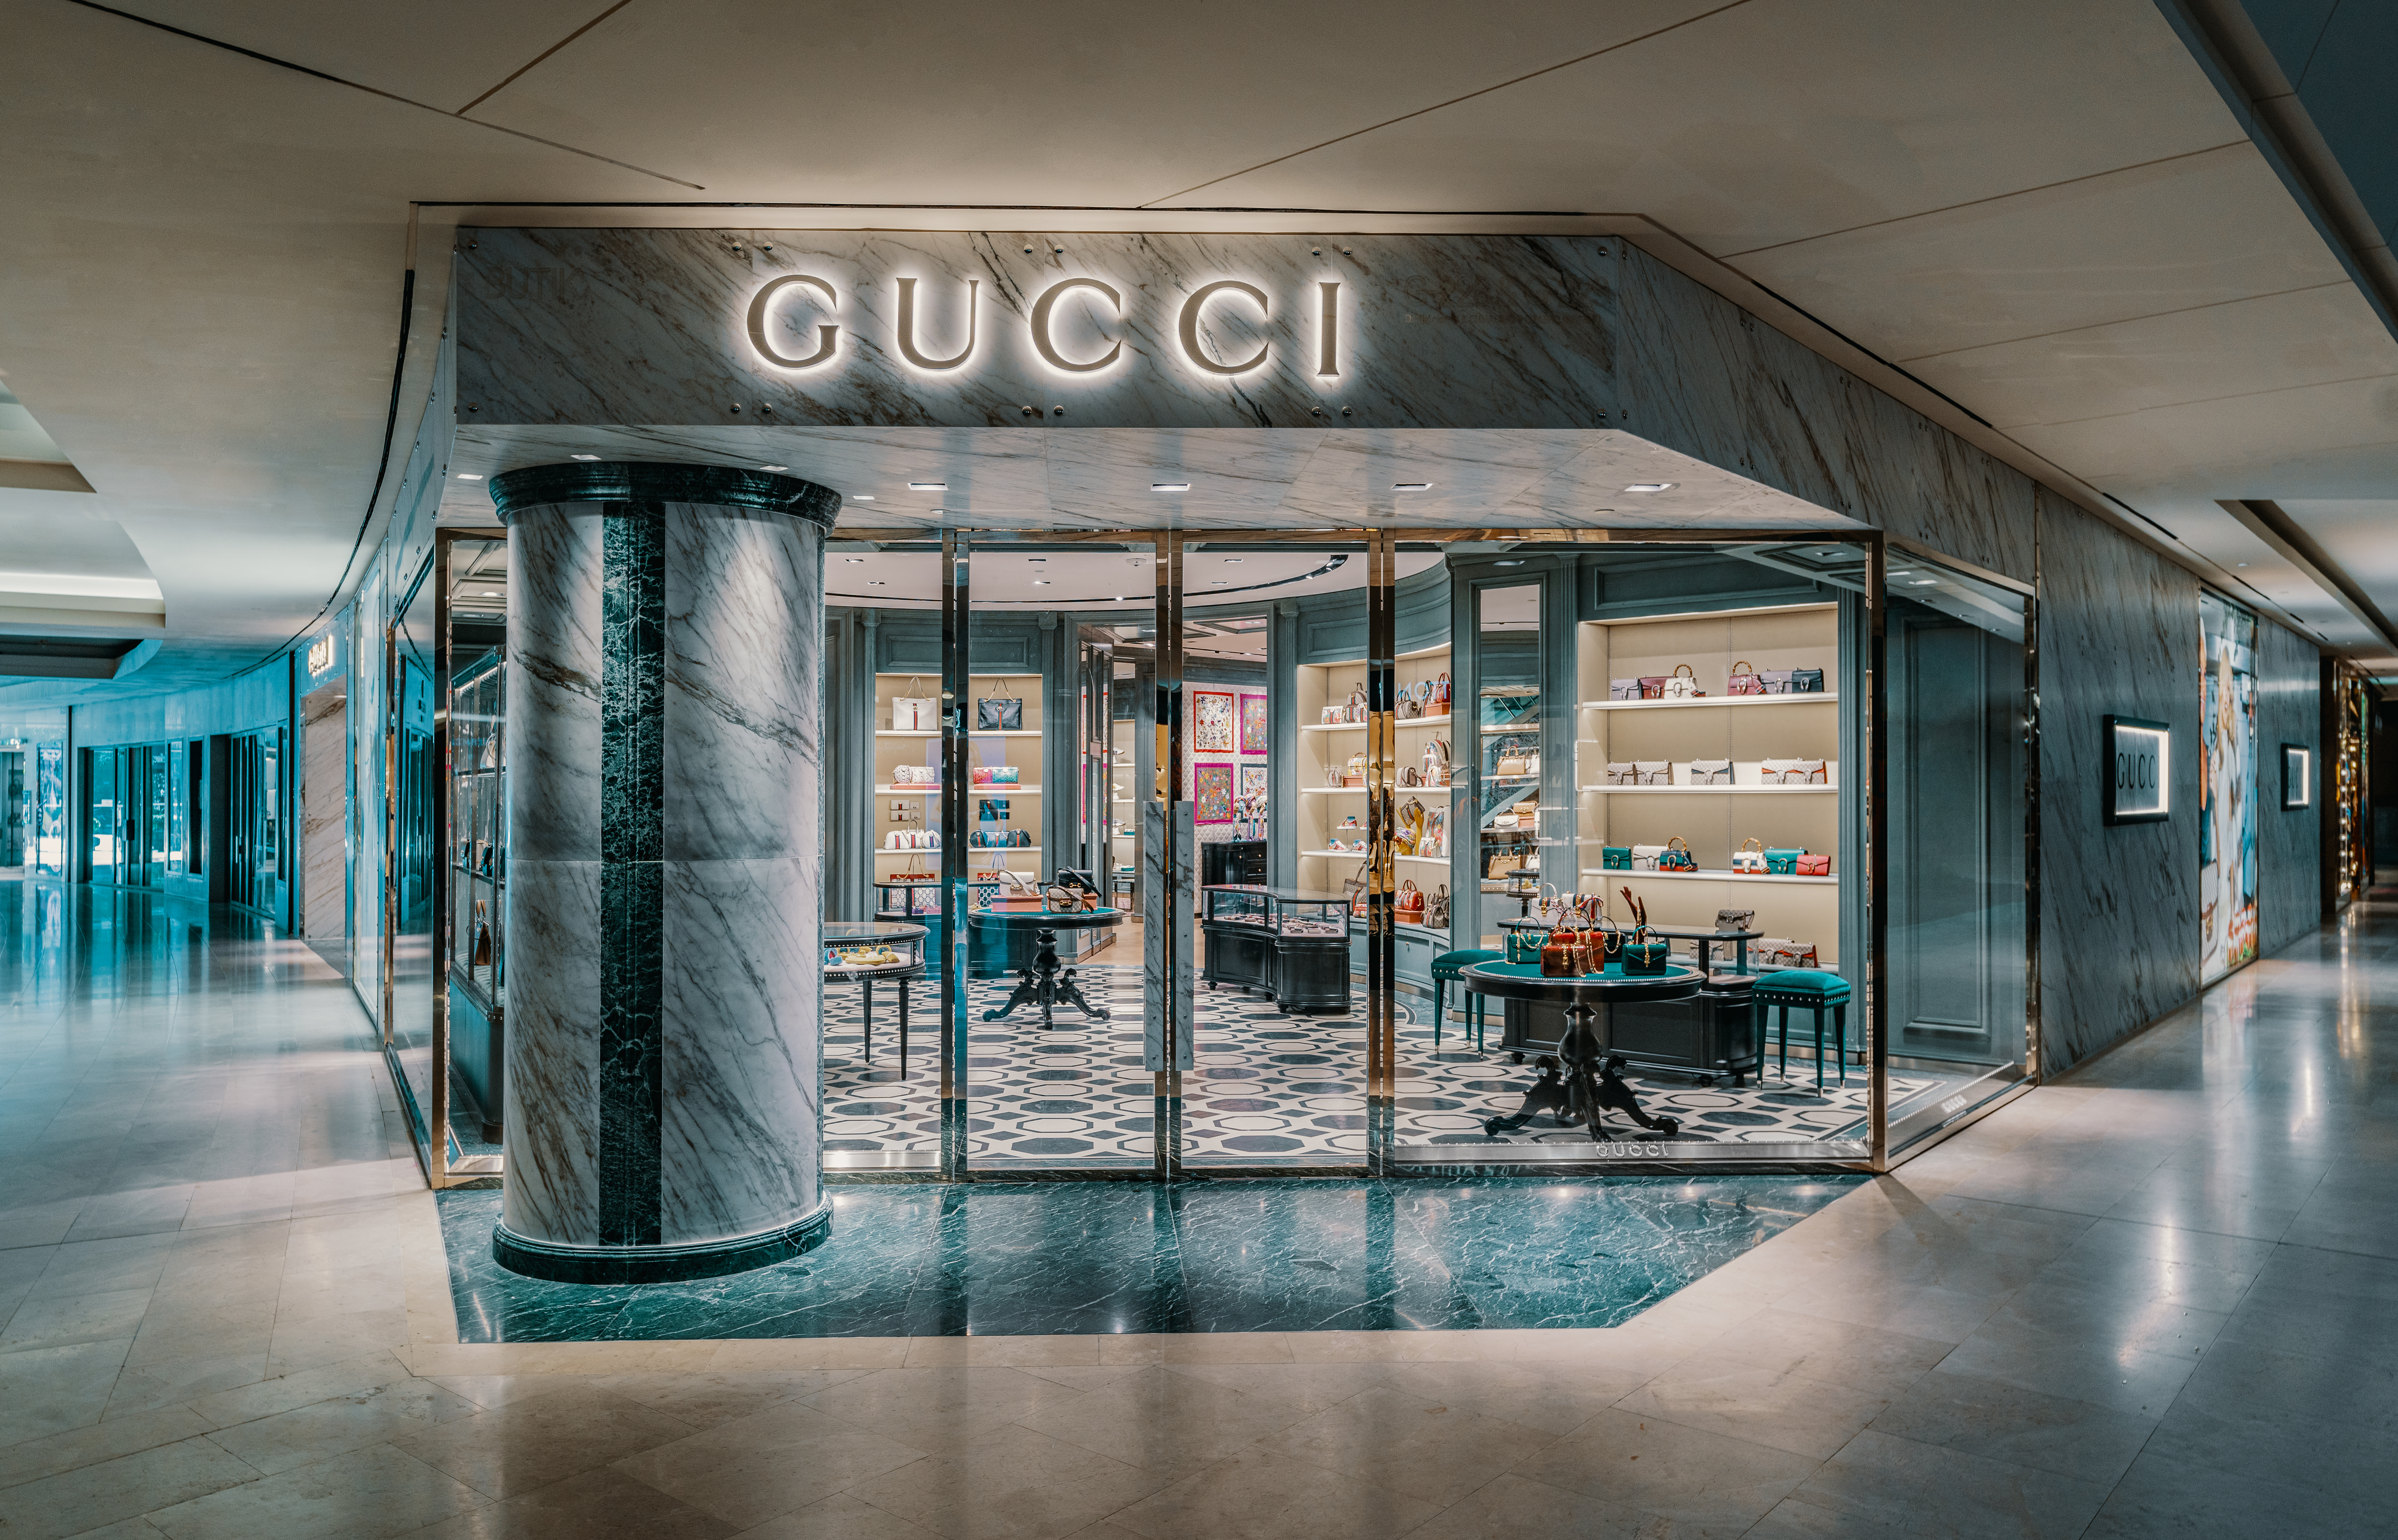 Gucci's The Gardens Mall boutique gets 